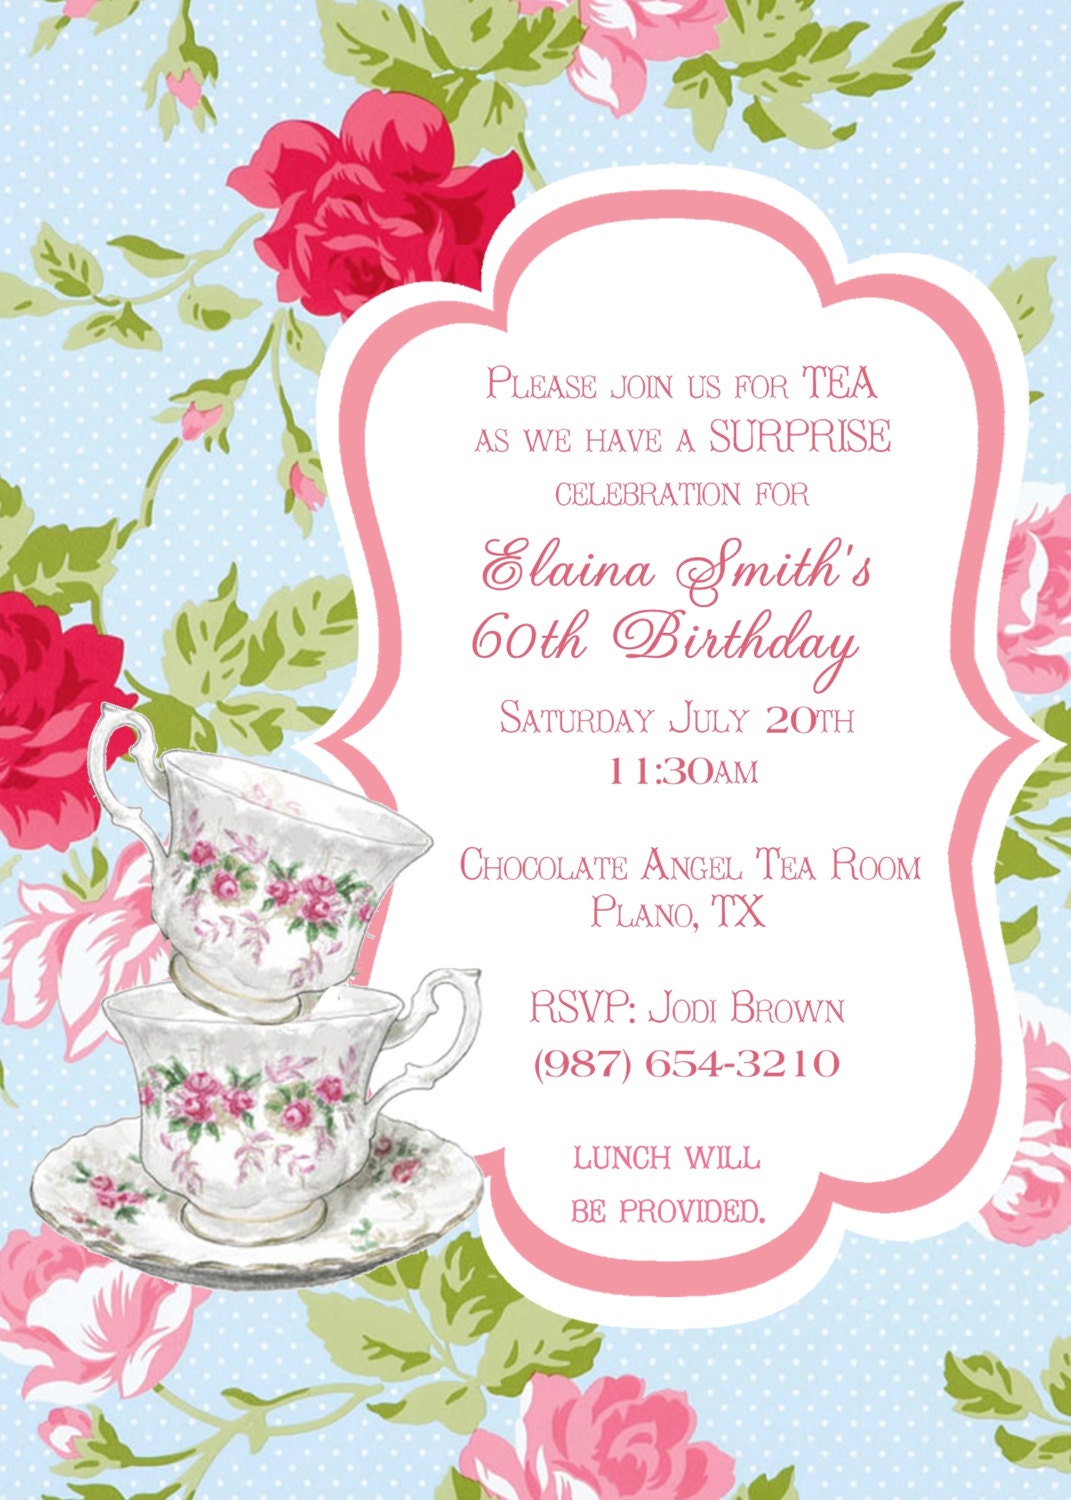 Mountain Wedding Invitations: Invitations For A Tea Party